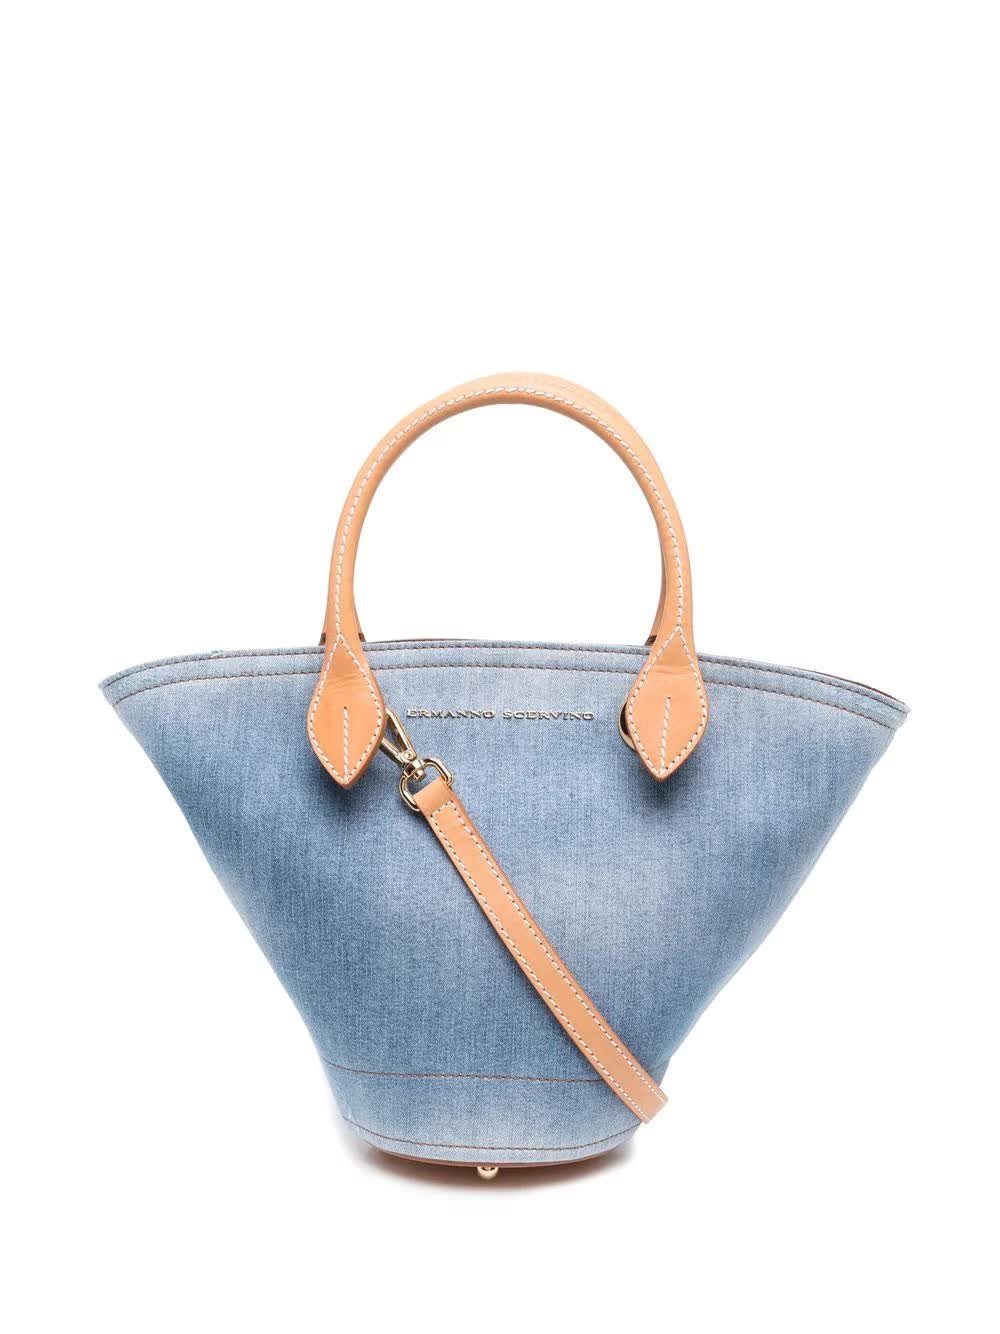 Ermanno Scervino Small Blue Denim Bucket Bag With Leather Handles